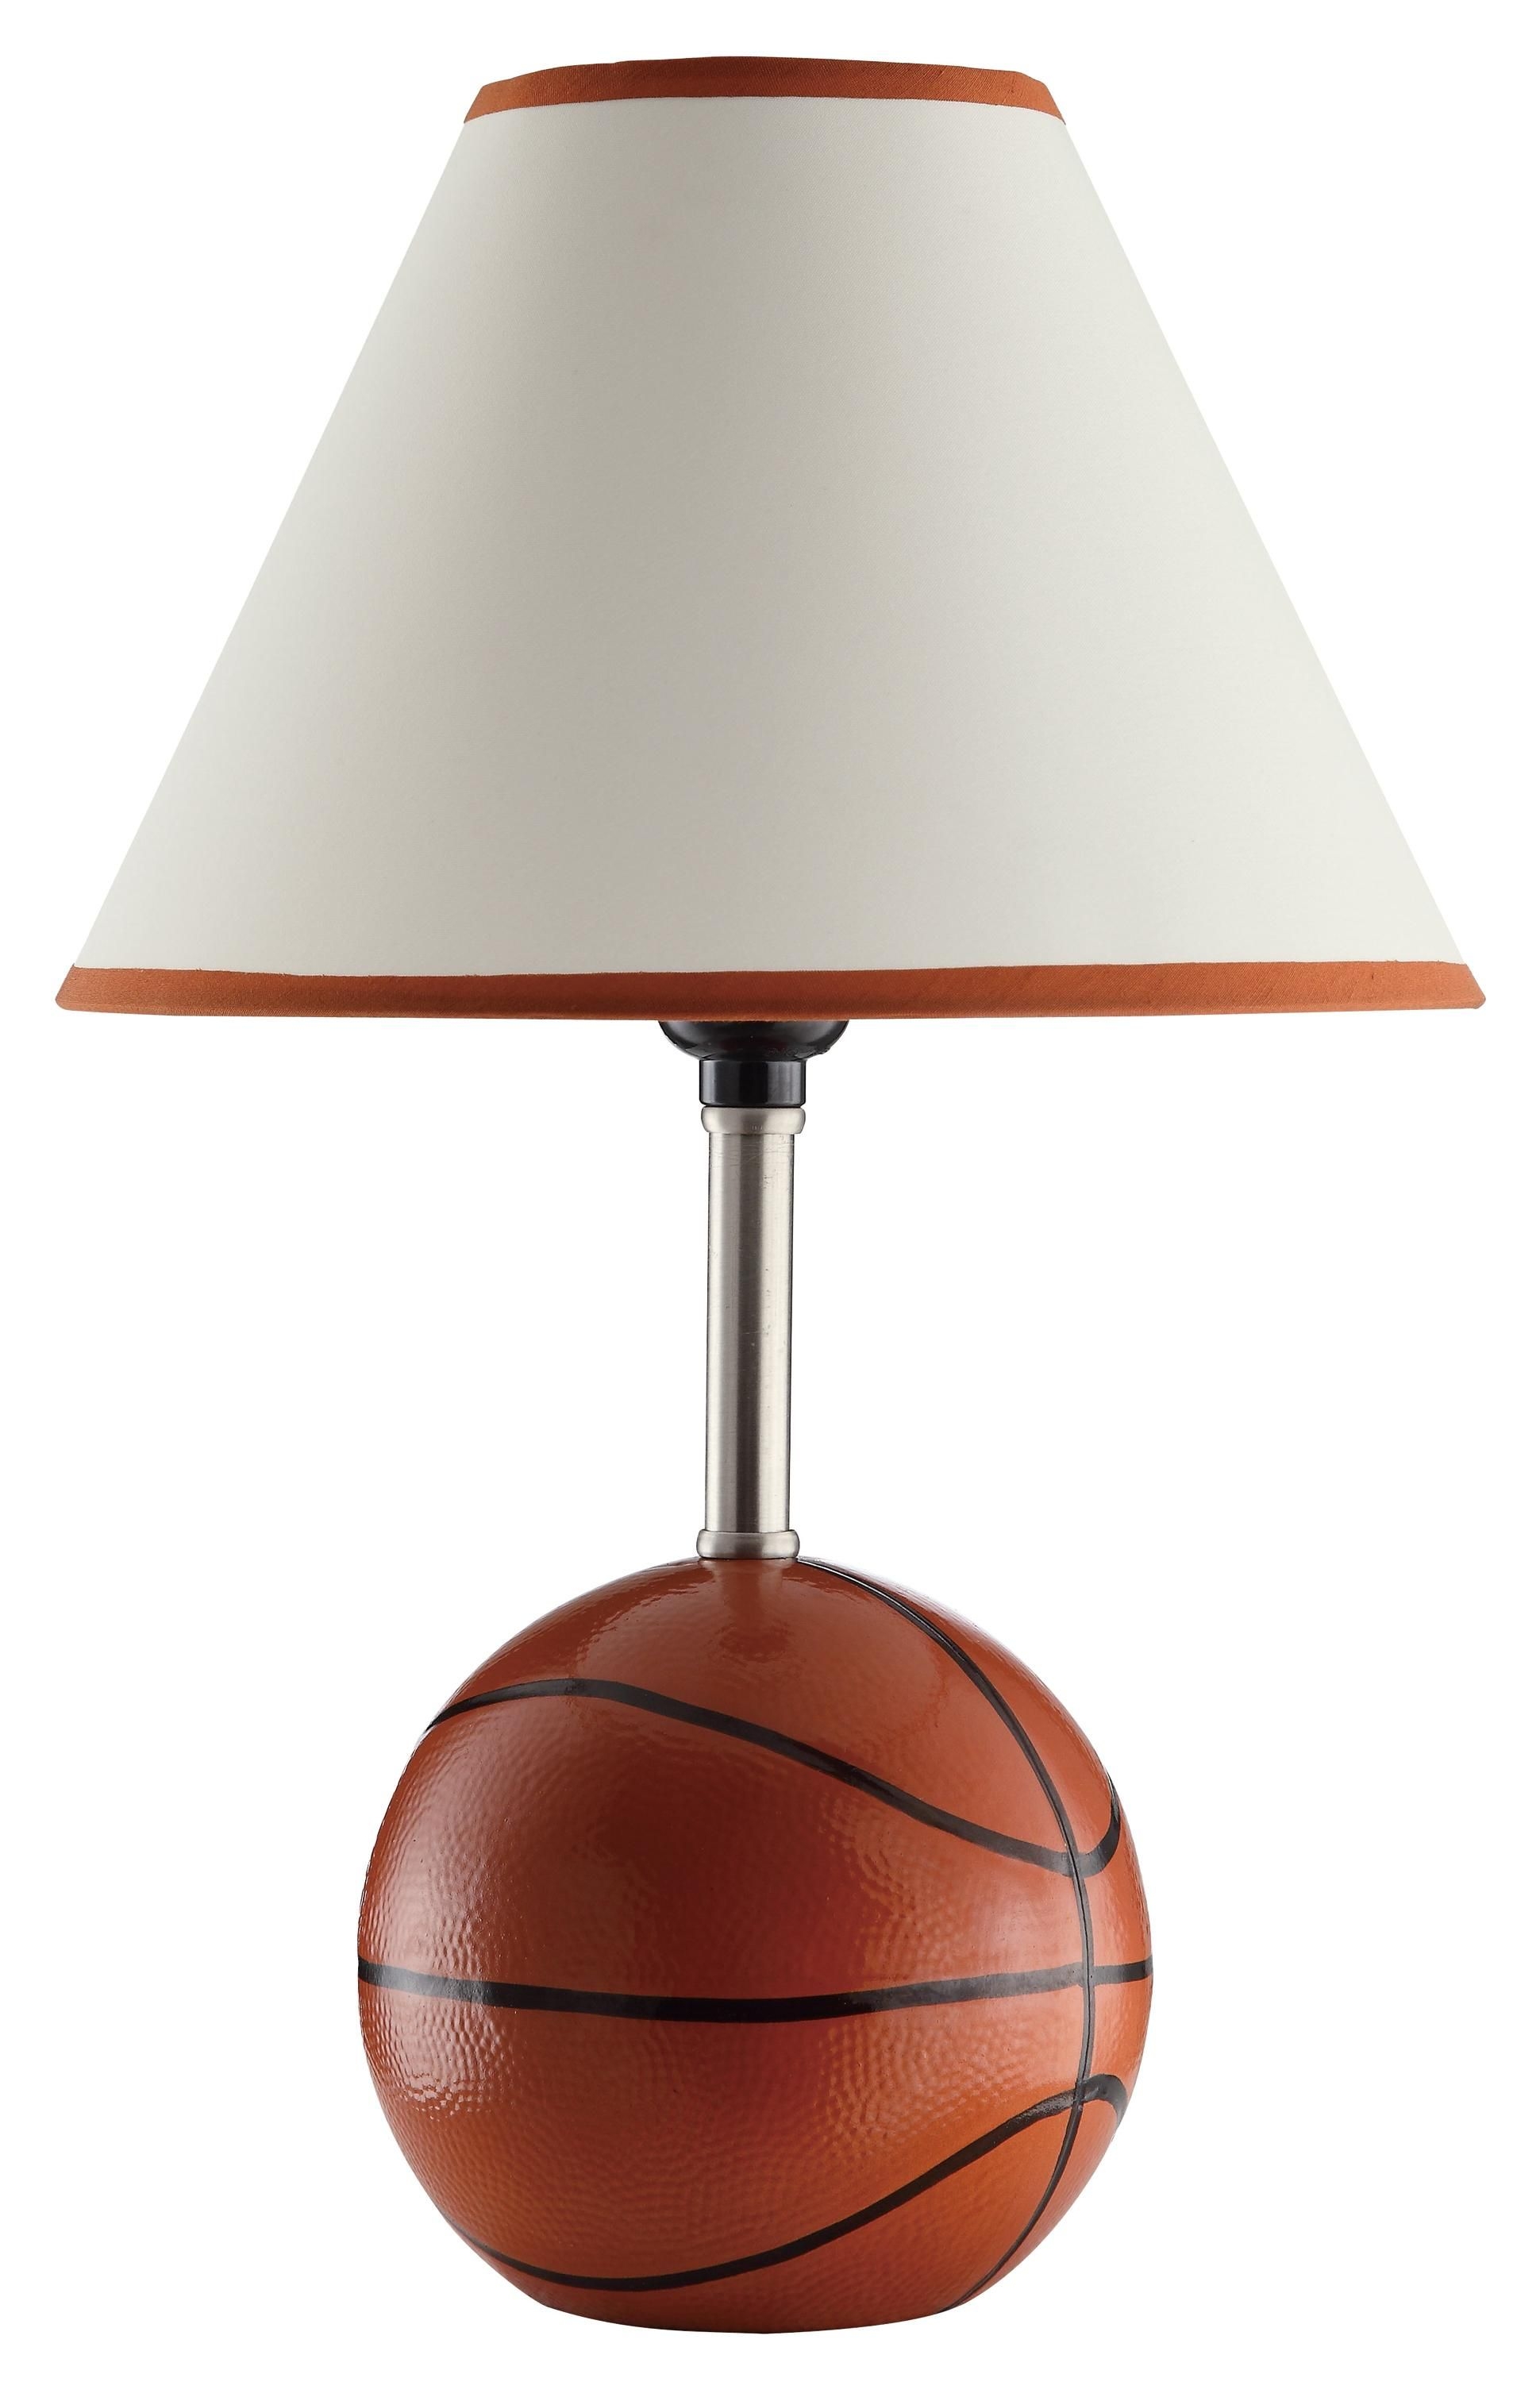 Kids sports basketball table lamp modern table lamps